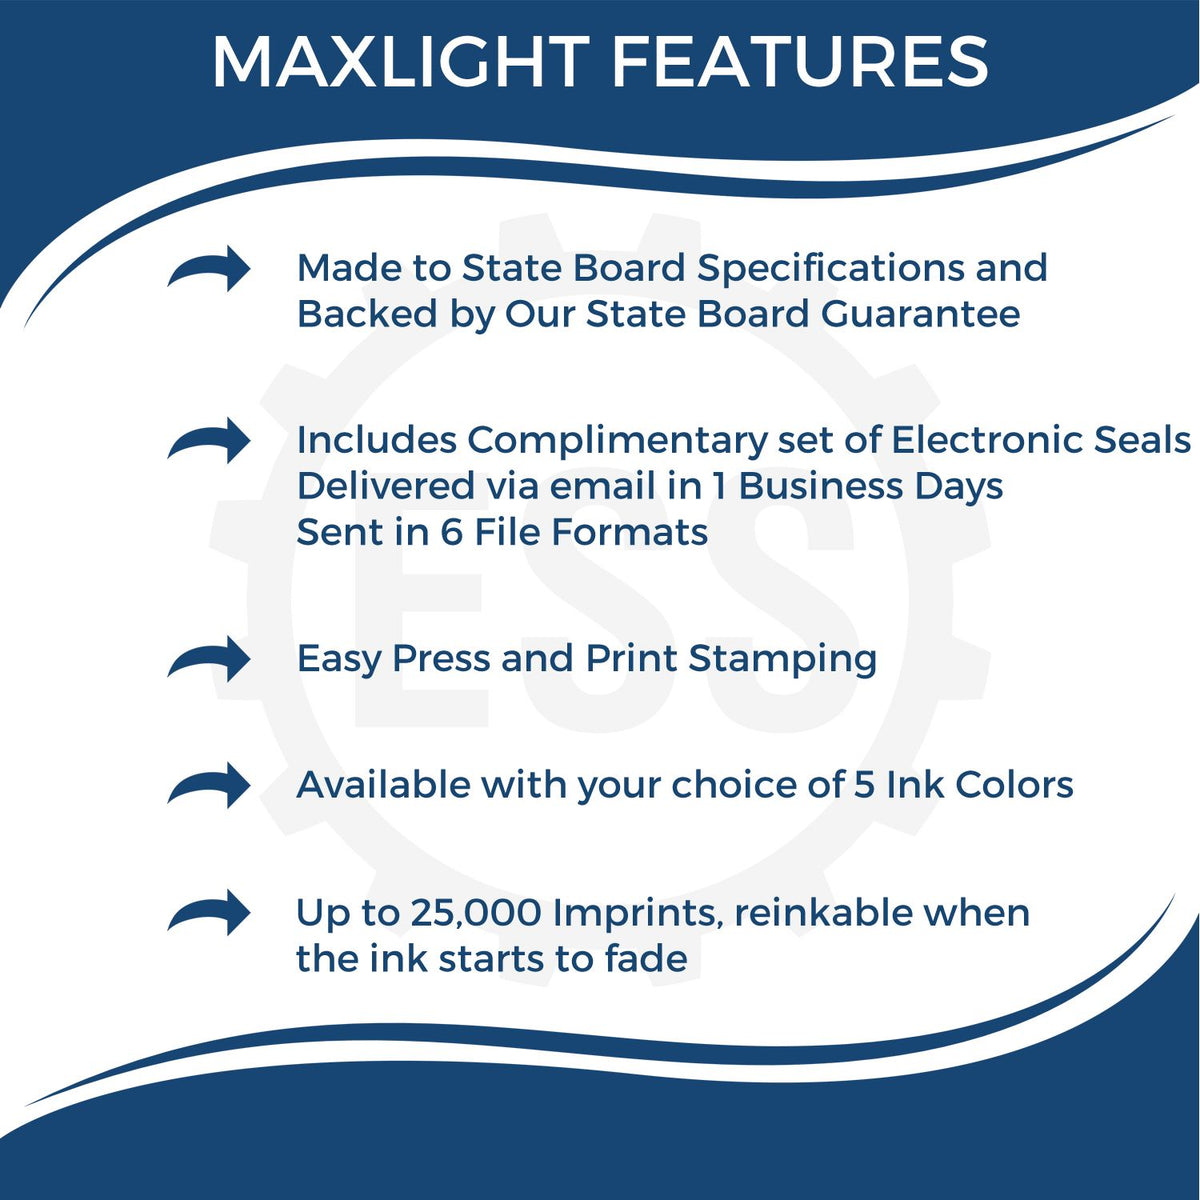 A picture of an infographic highlighting the selling points for the Premium MaxLight Pre-Inked Louisiana Landscape Architectural Stamp